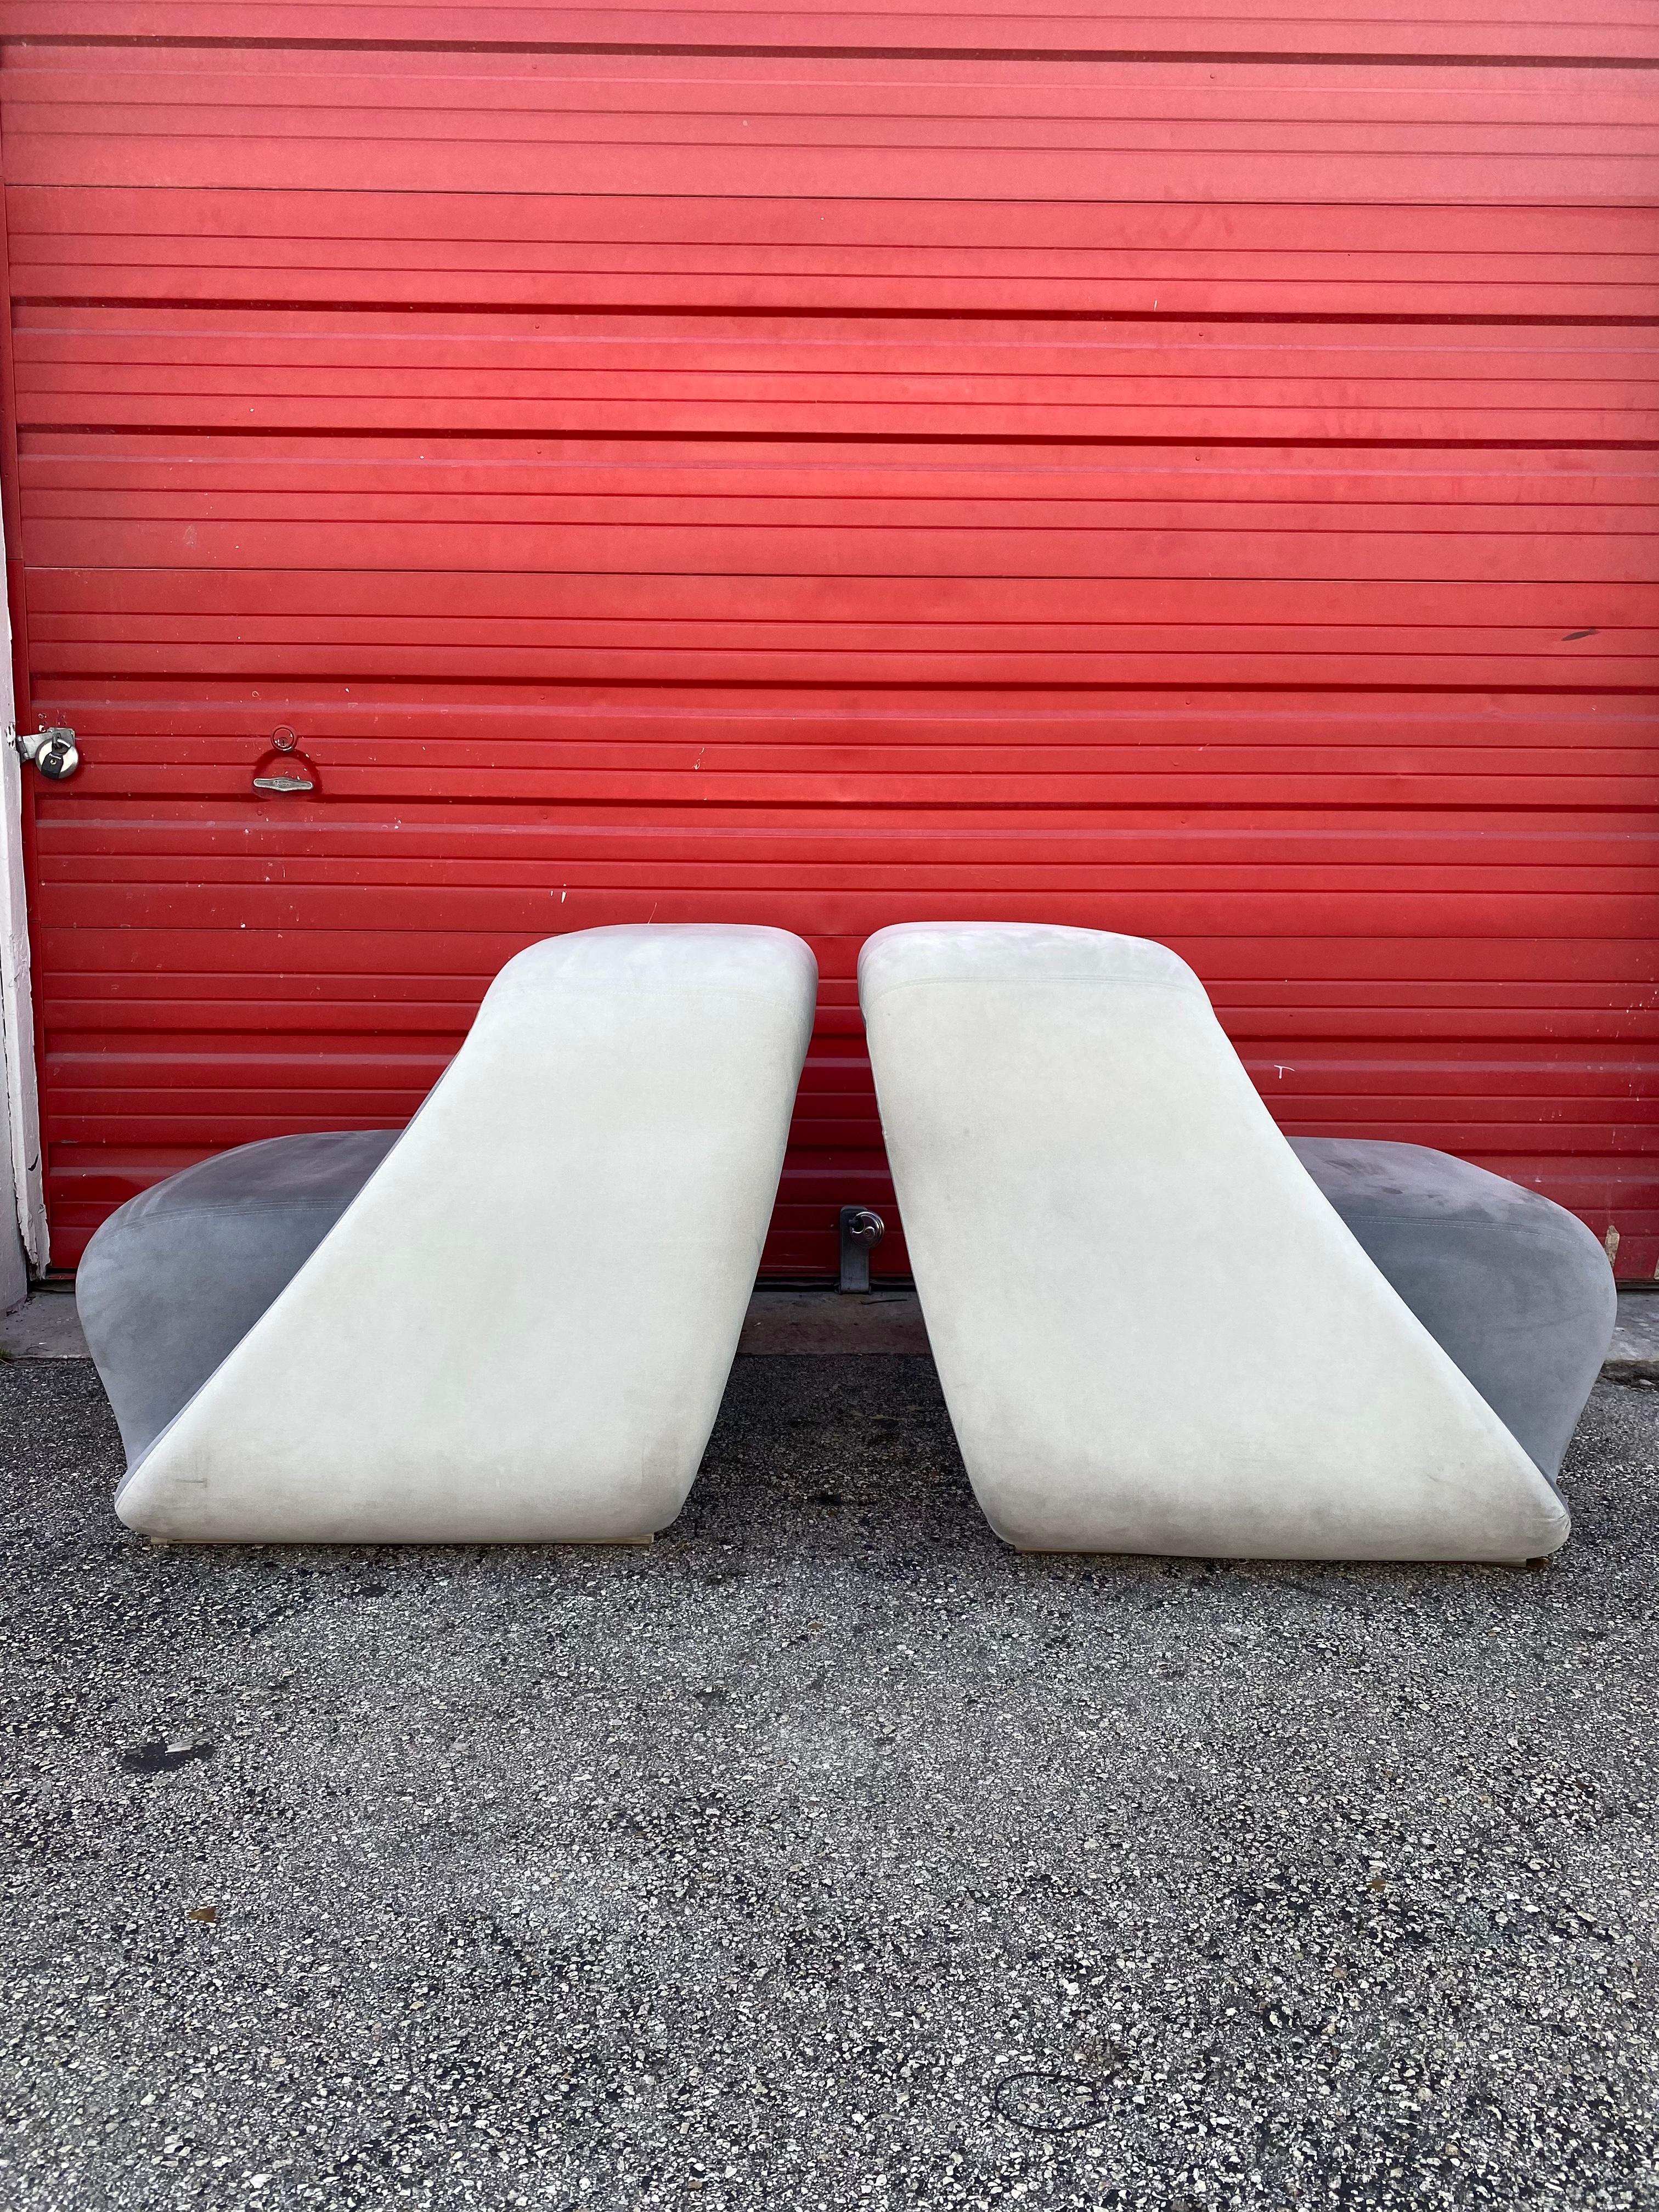 1970s Meritalia Sculptural Space Age Air Loungers Chairs, Set of 2 For Sale 4